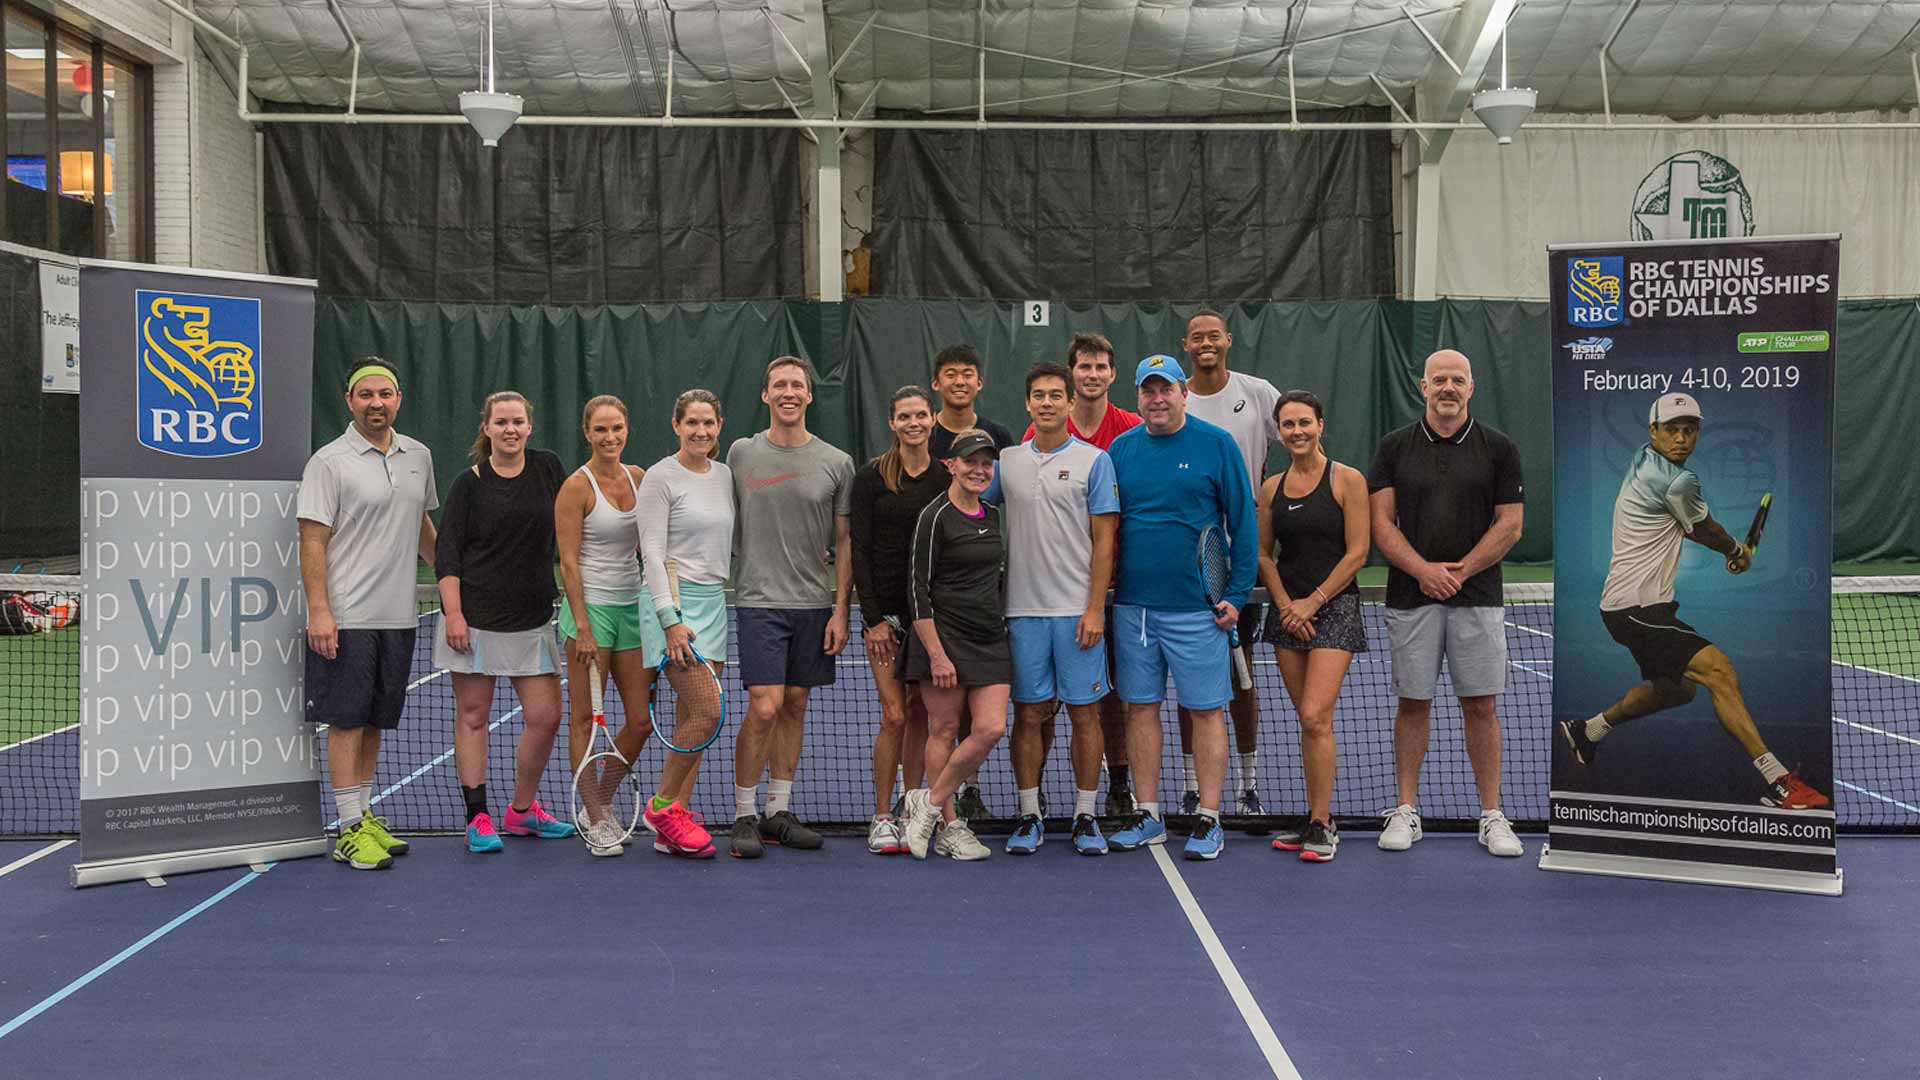 Innovation and Southern Hospitality A Formula Of Success In Dallas ATP Tour Tennis